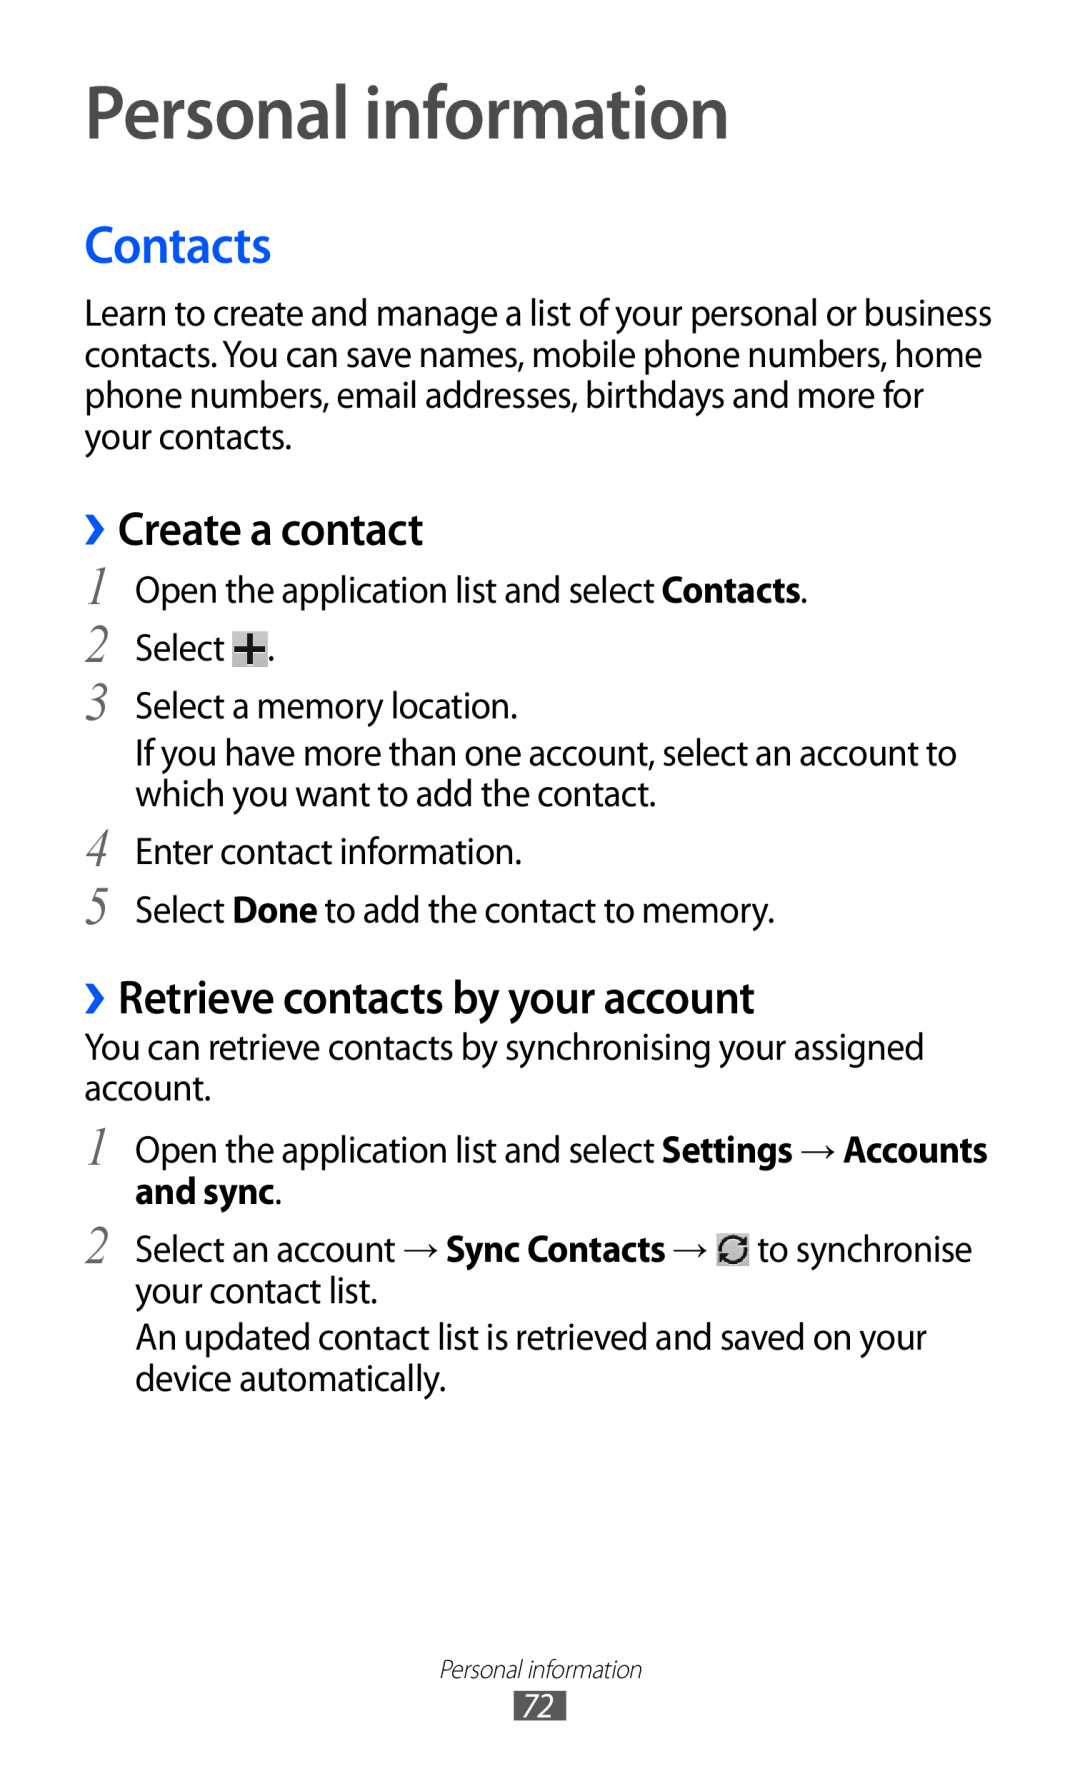 Samsung GT-P7320UWAVD2 Personal information, Contacts, ››Create a contact, ››Retrieve contacts by your account, and sync 